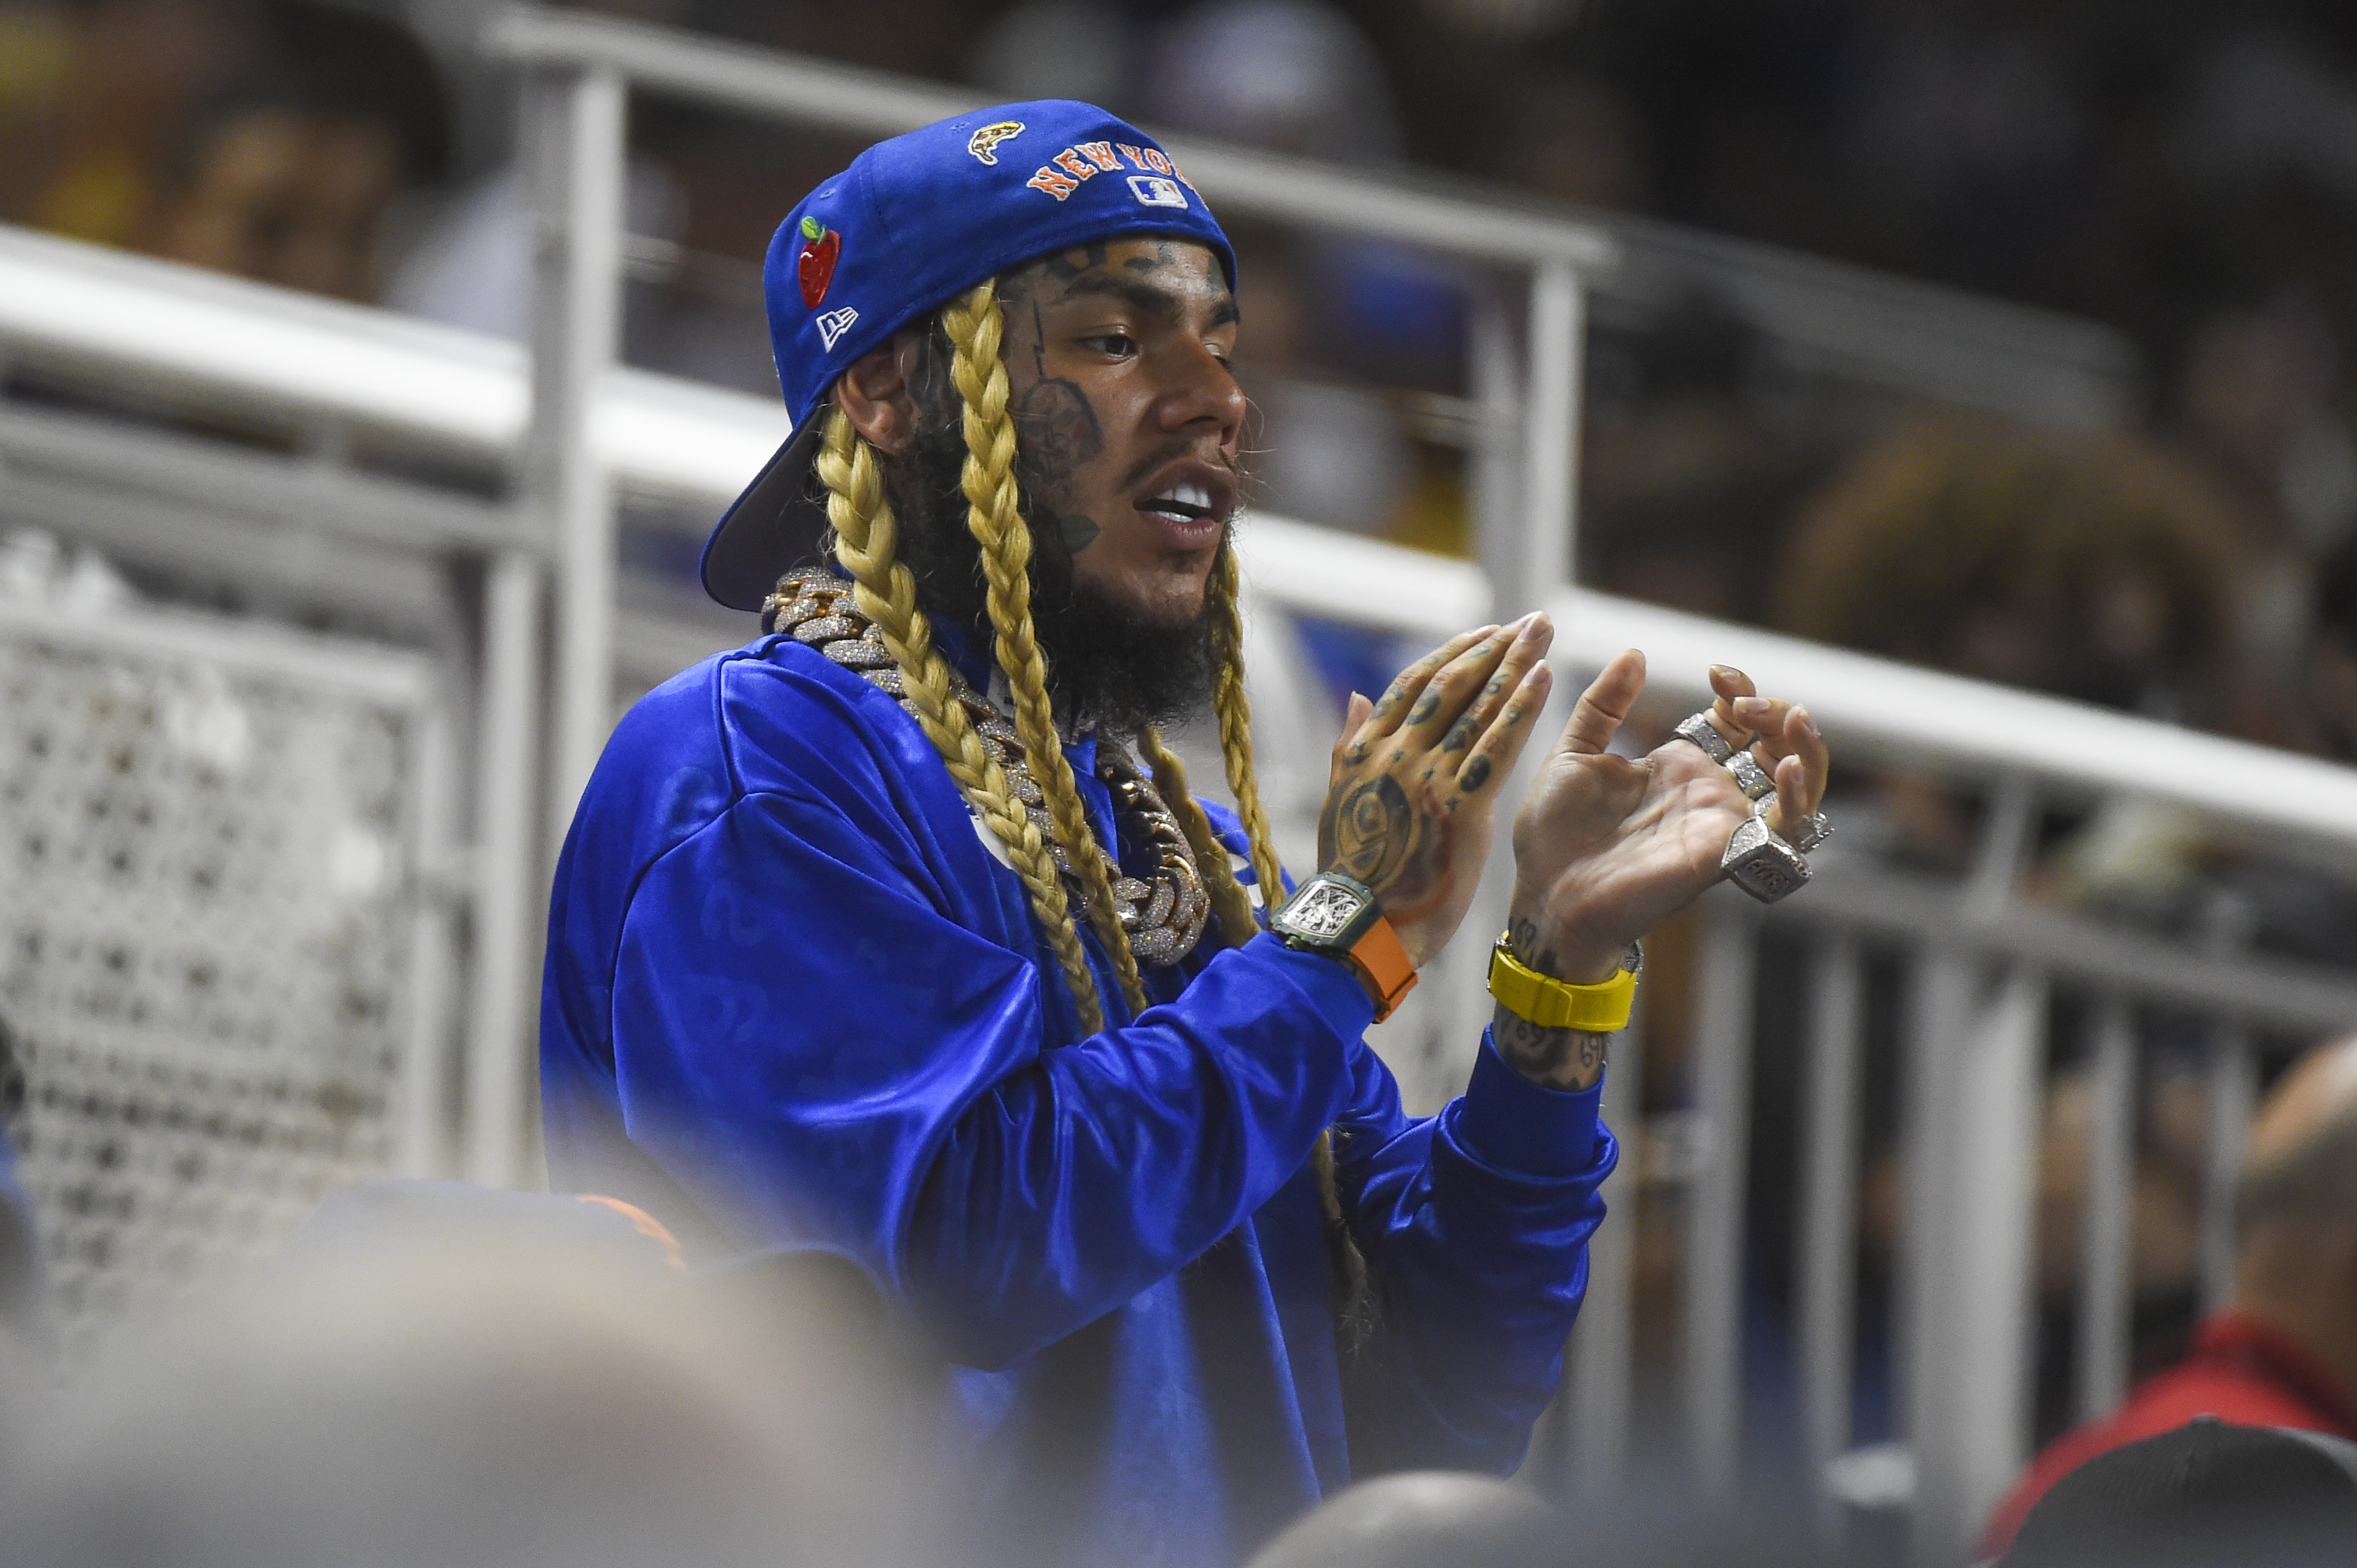 6ix9ine’s Bodyguard Wants To Fight His Attackers For $10K: “If You Lose You Die”